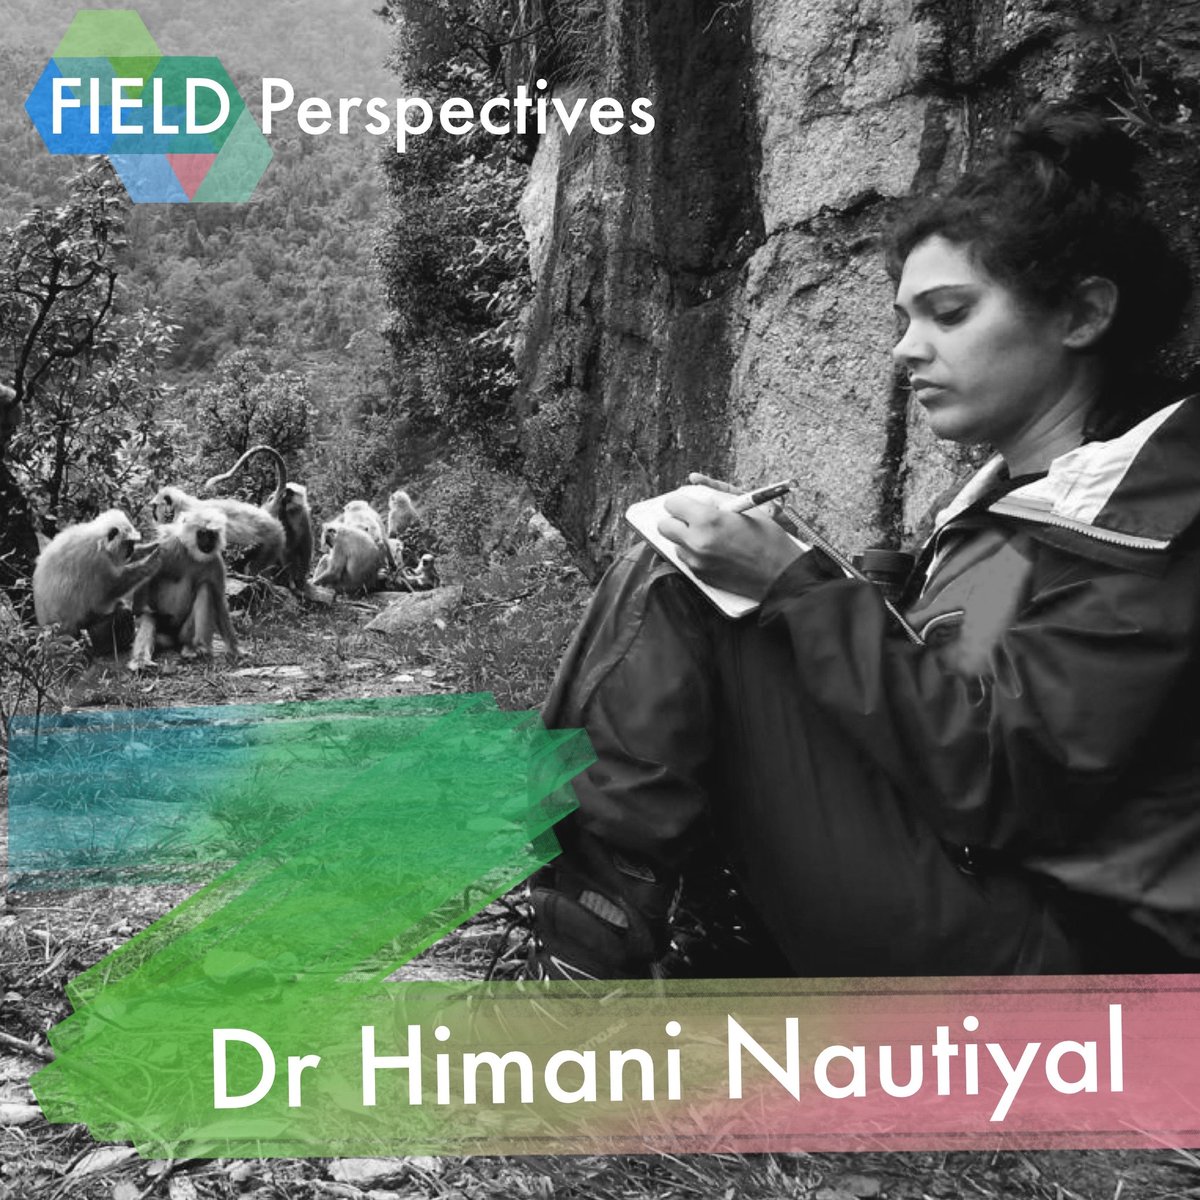 At fieldperspectives.org ... Himani Nautiyal discusses recontexualising identity with fieldwork. 'Our identity in the field is molded by our surrounding environment, the local people, forests, and wildlife.' #fieldperspectives